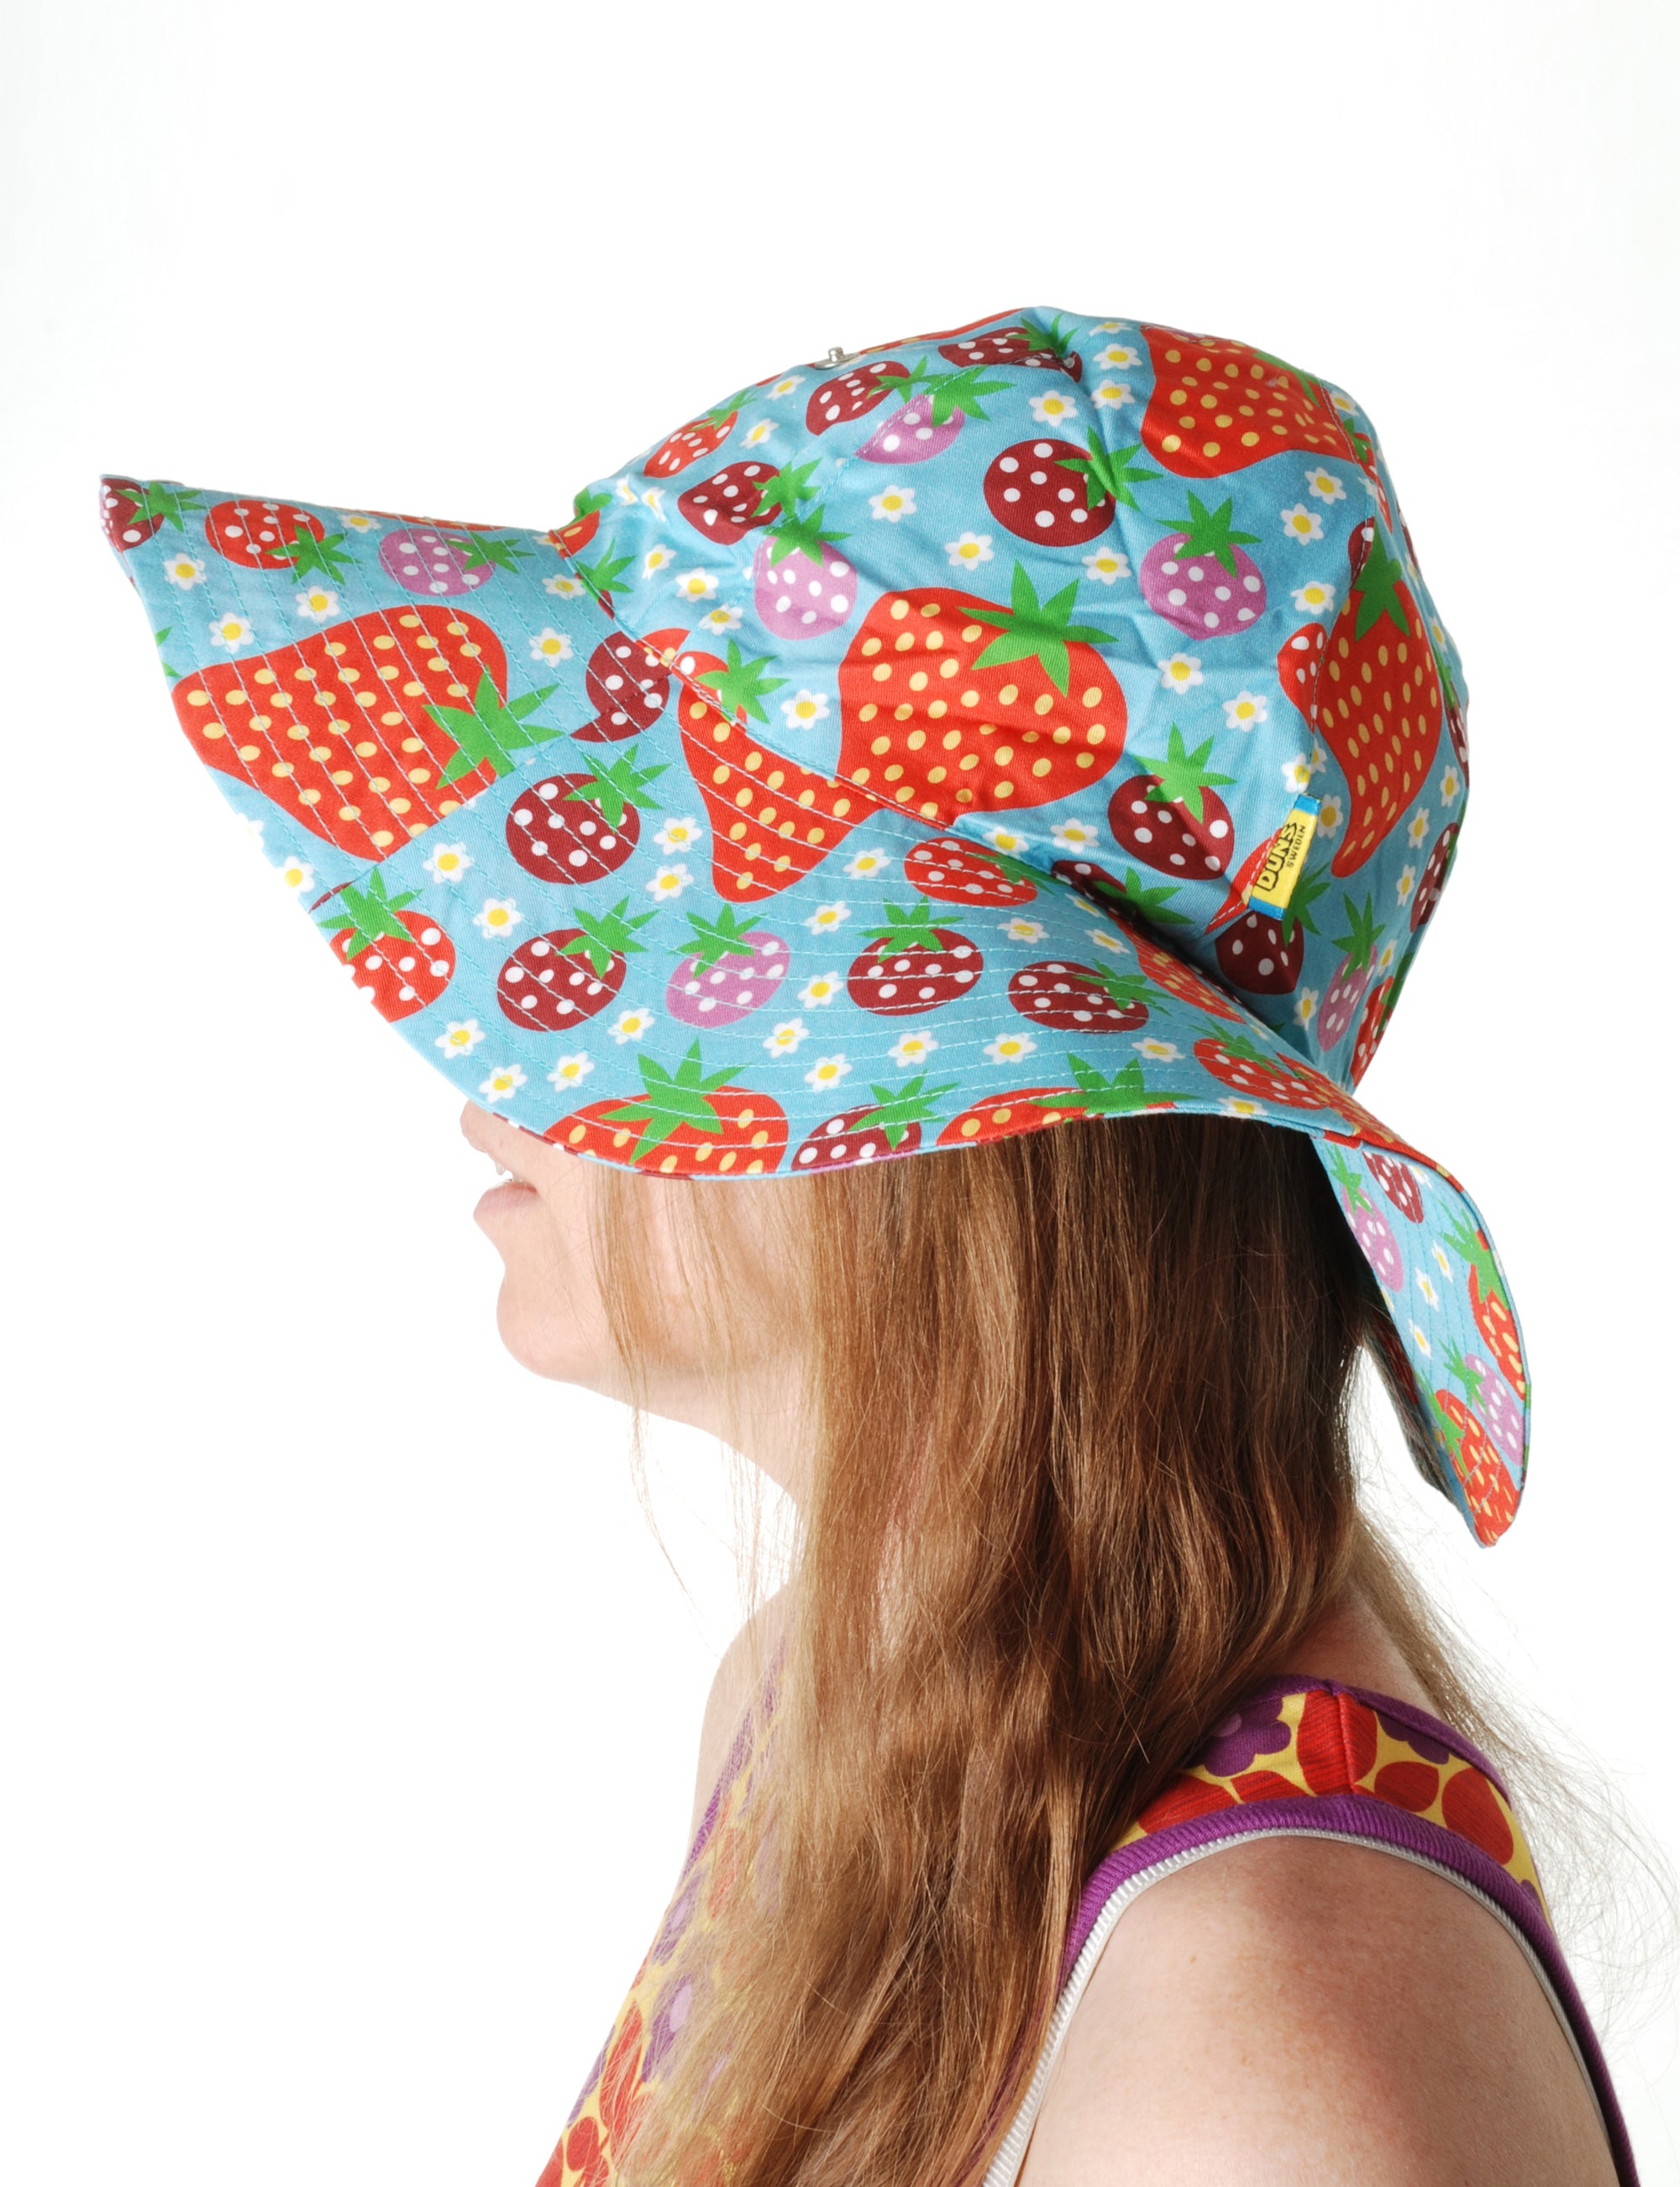 Duns Sweden - Sunhat Strawberry Fields Turquoise